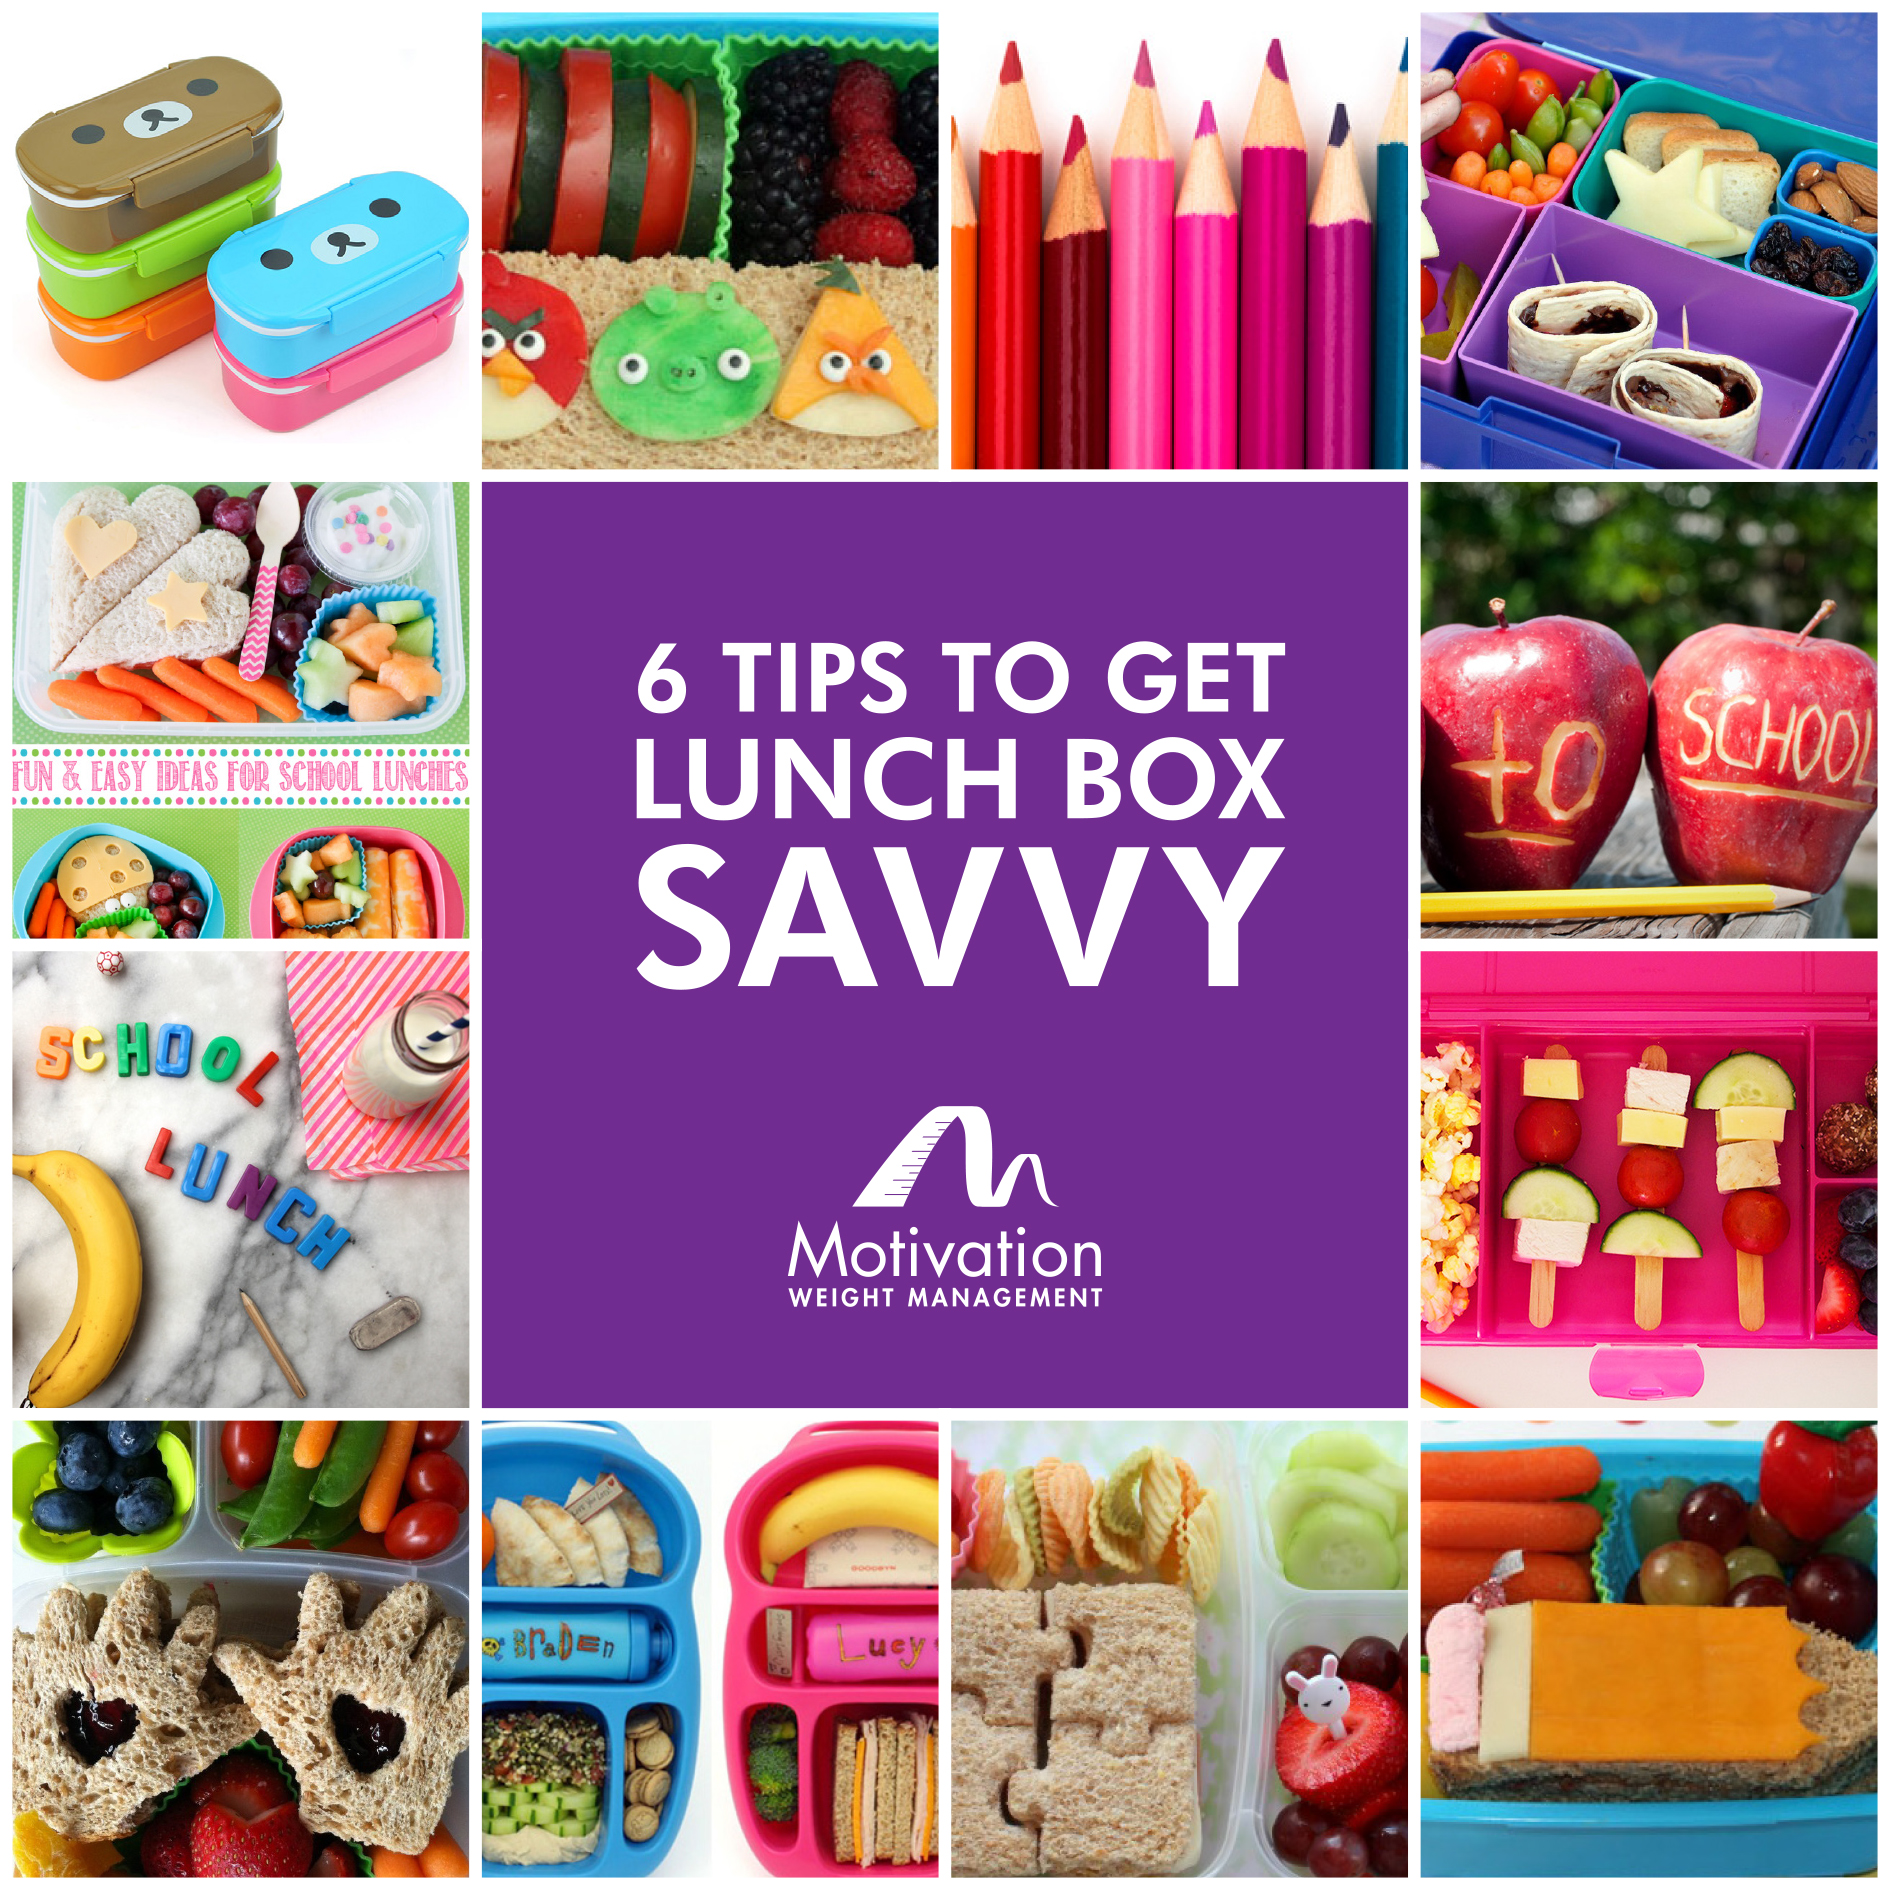 Healthy Tips To Get Lunch Box Savvy This Year